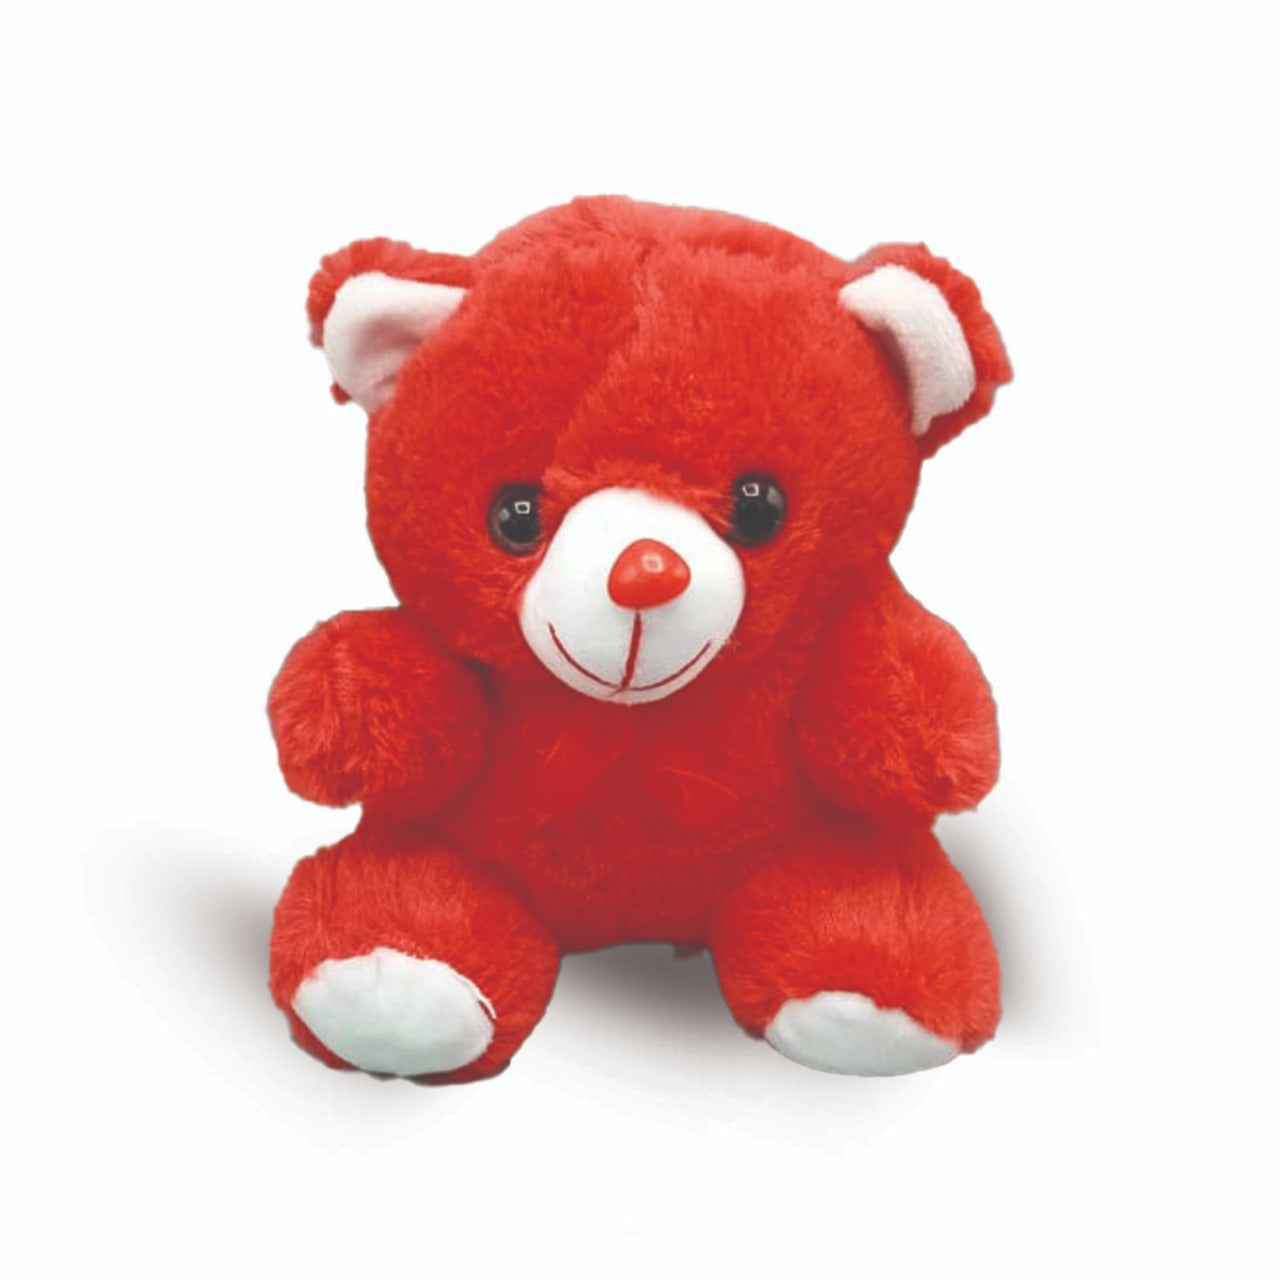 Teddy Bear Stuffed Toy - Available In 3 Color